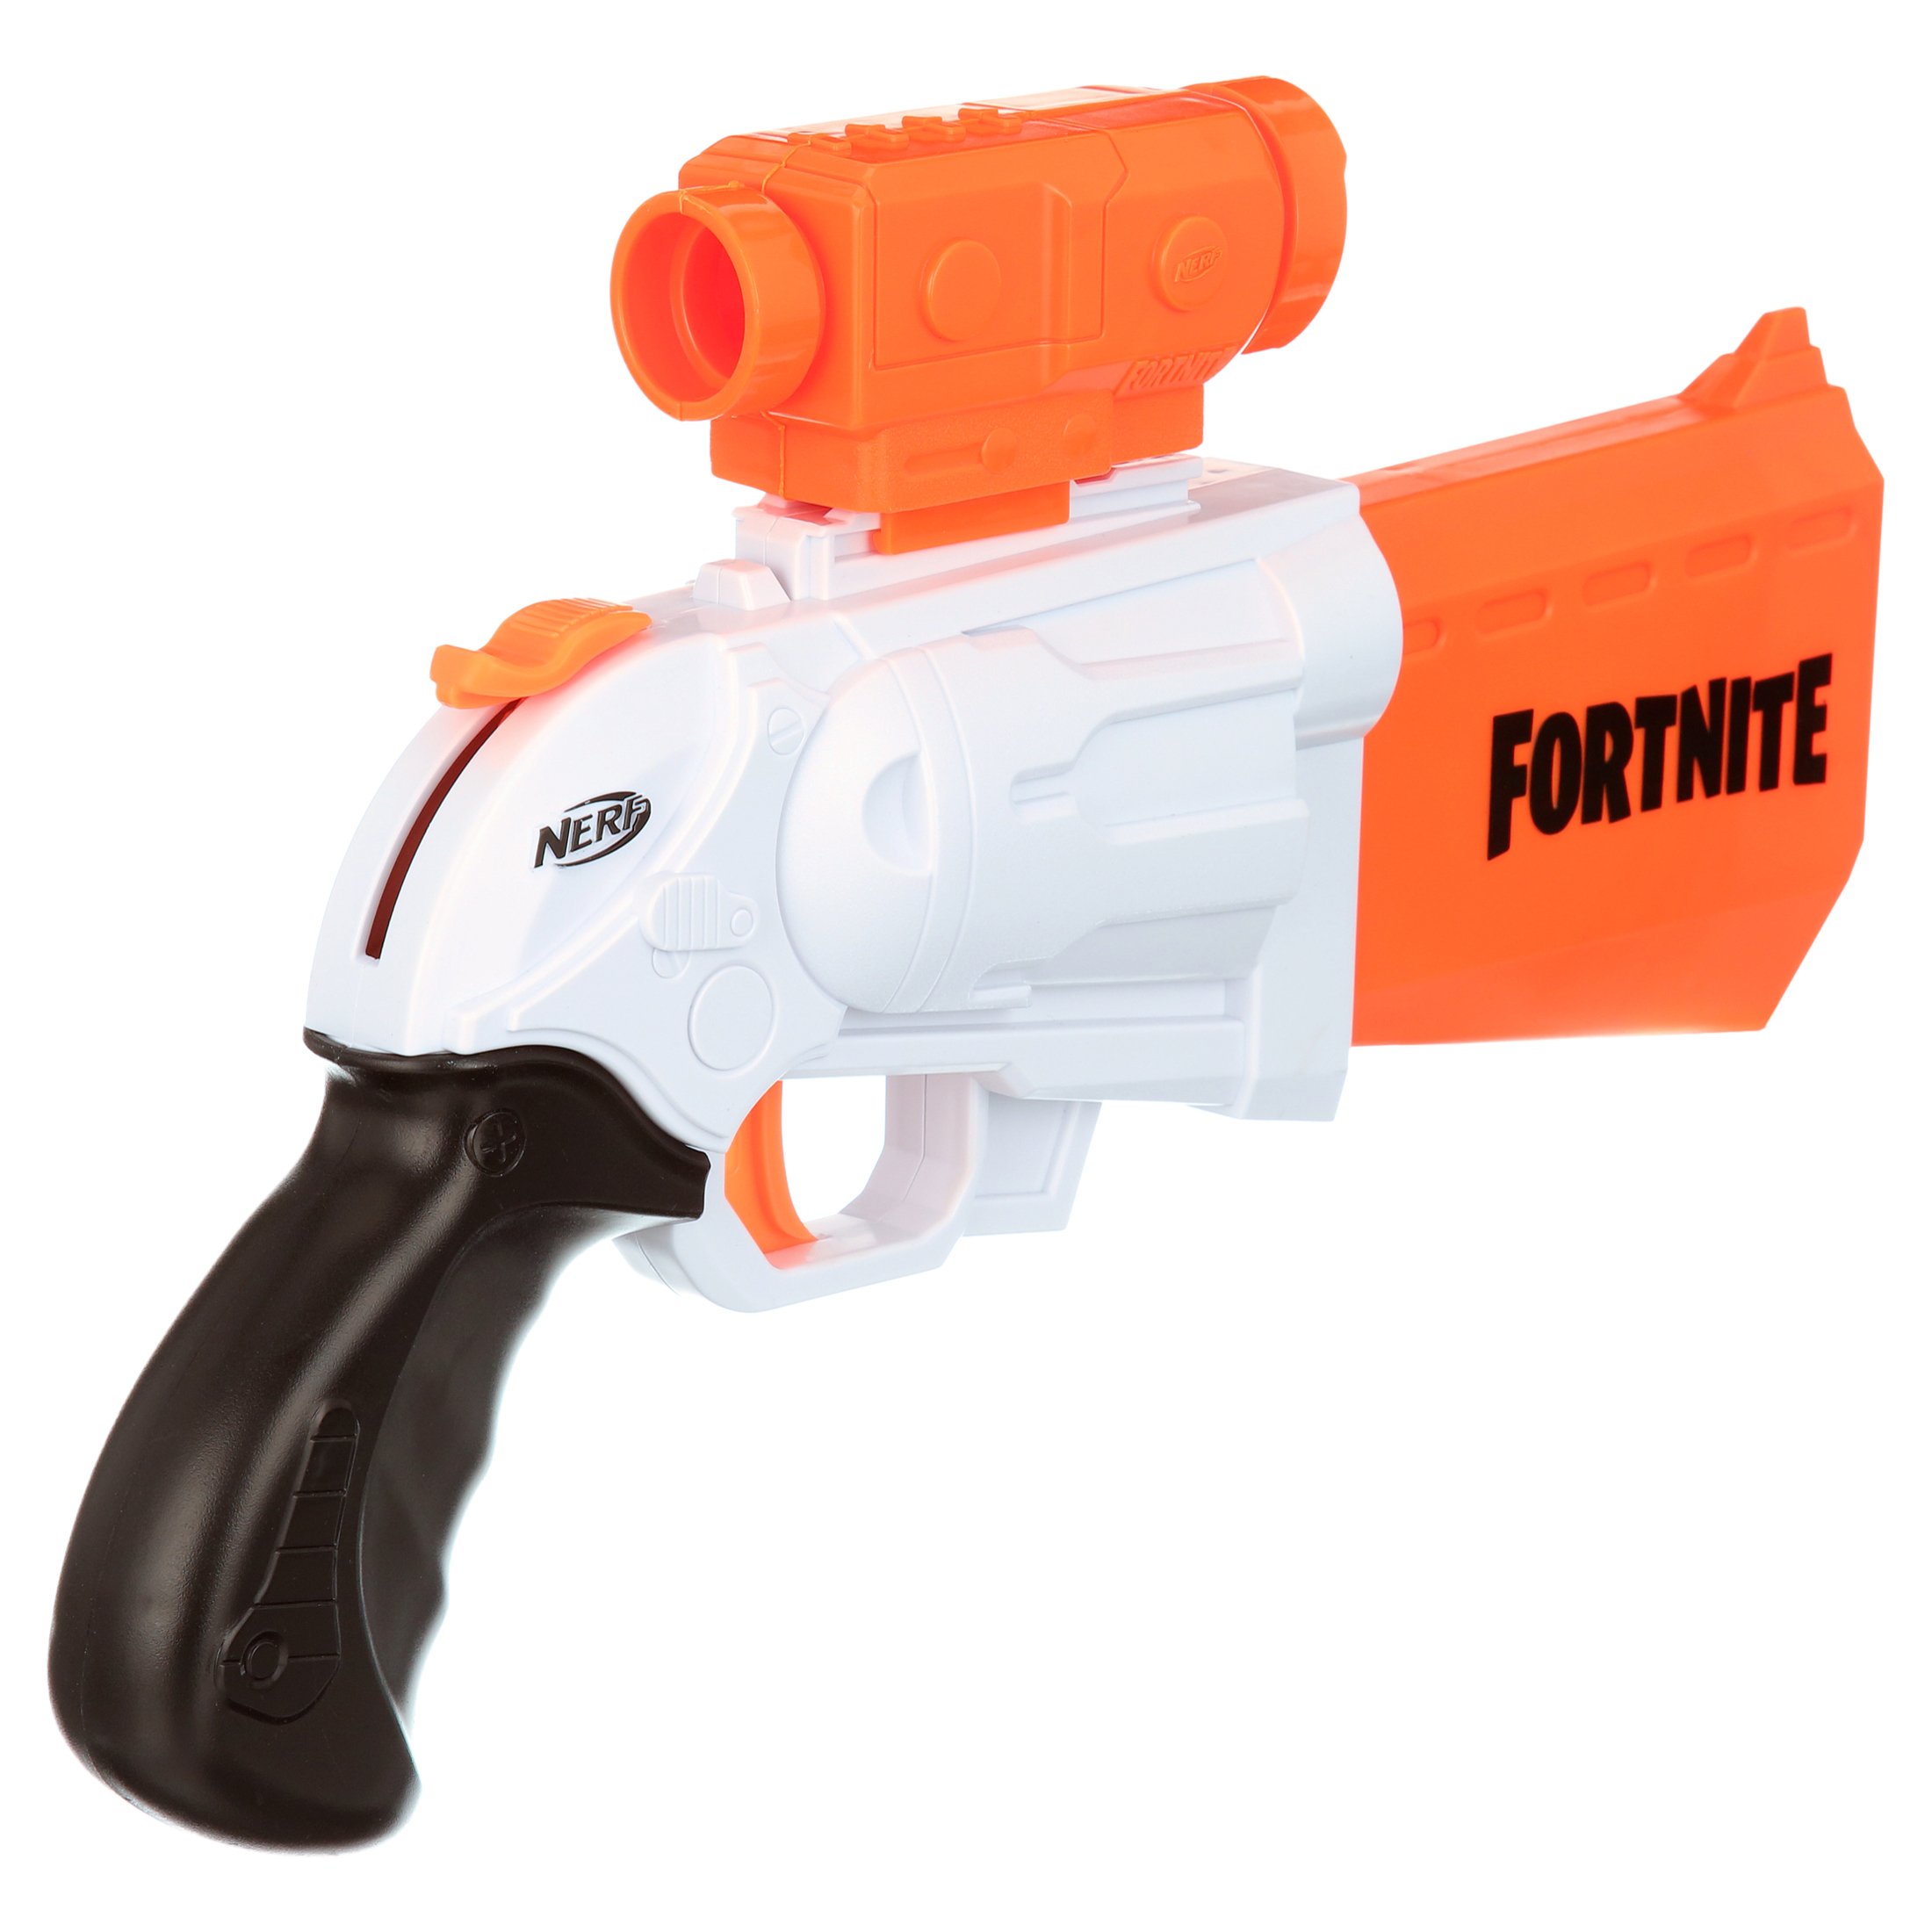 Nerf Fortnite SR Blaster, Includes 8 Official Nerf Darts, for Kids Ages 8 and Up - image 4 of 7